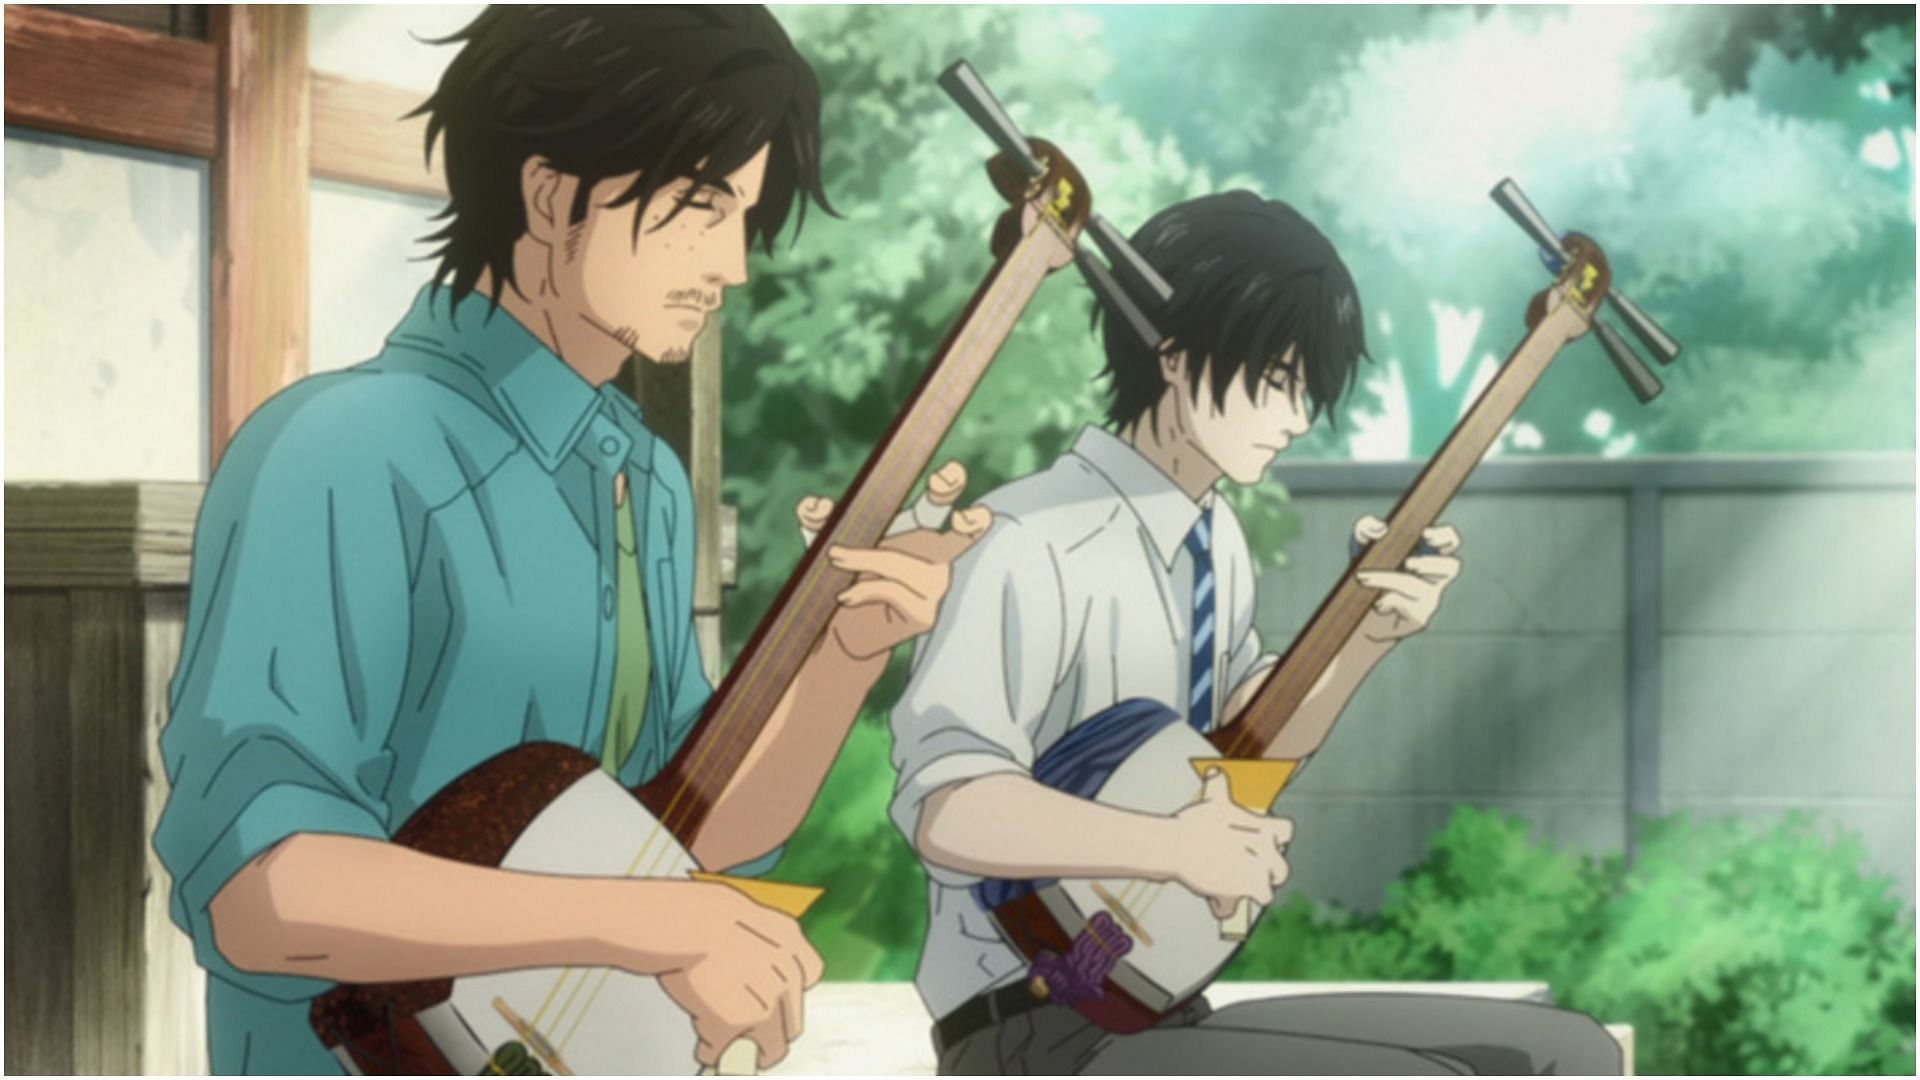 Setsu playing Shamisen with his brother as seen in the anime Those Snow White Notes (Image via Shin-Ei Animation)